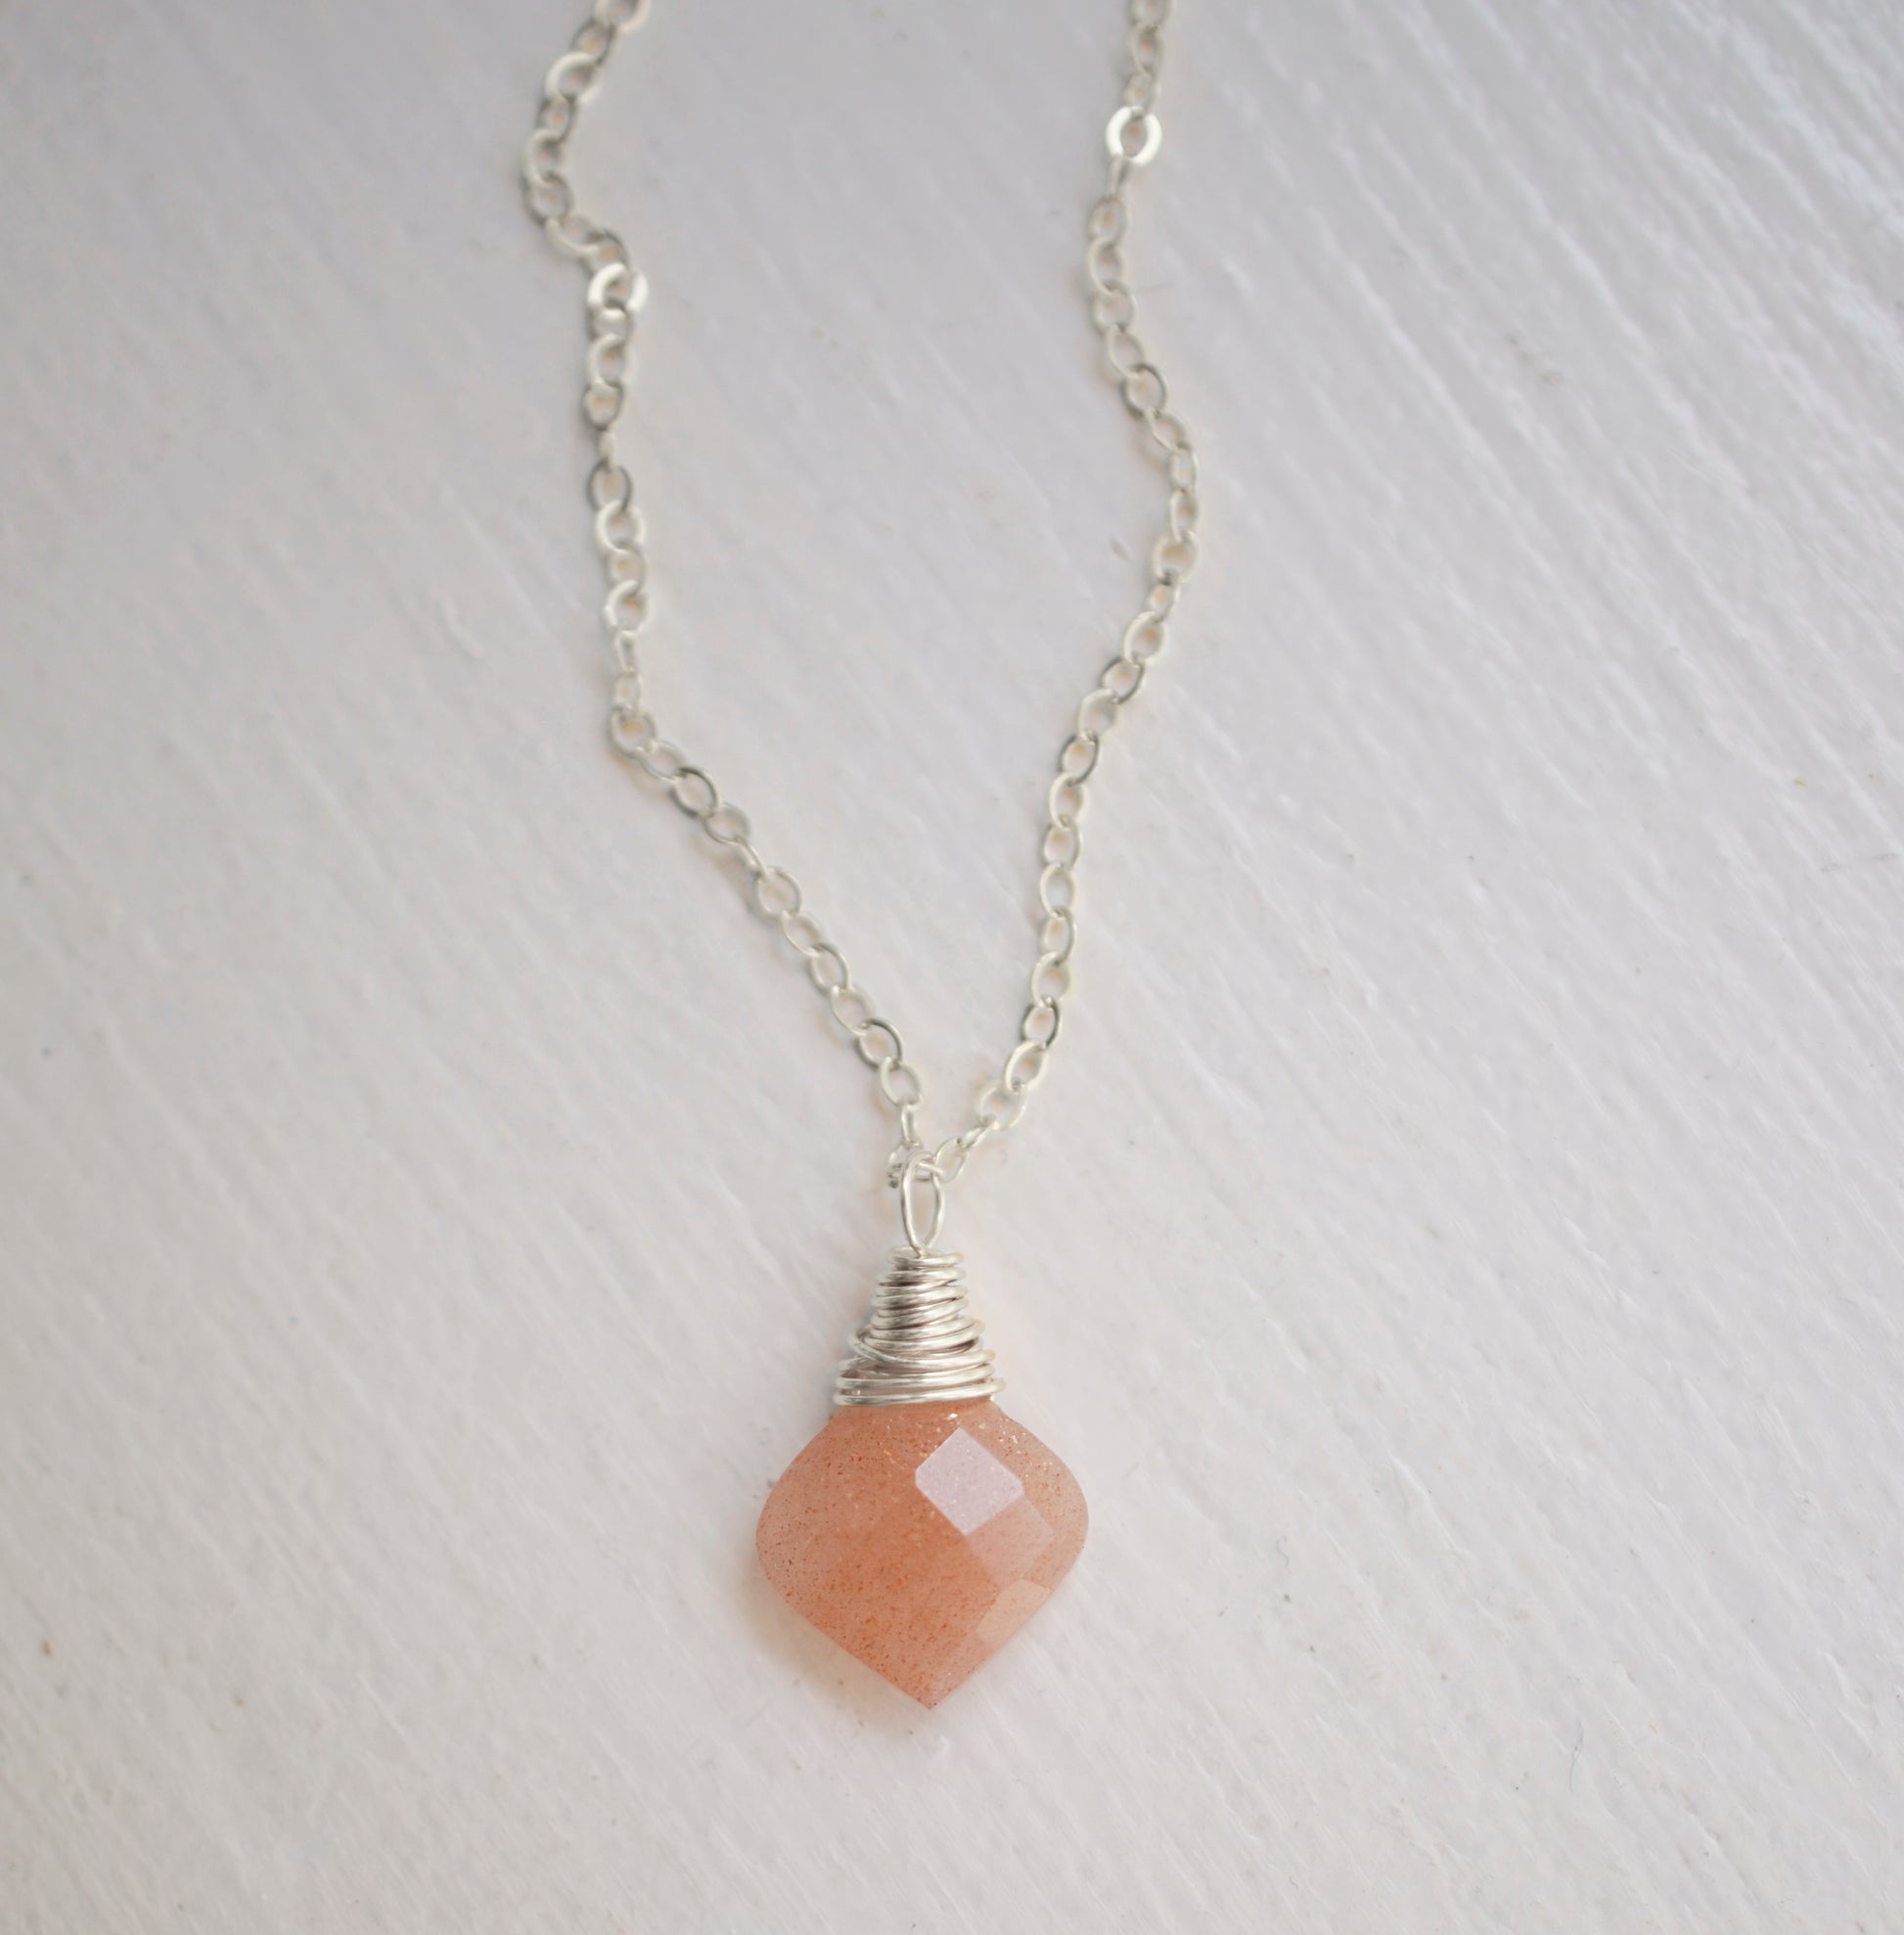 Peach Sunstone Necklace - 14k Gold Fill or Sterling Silver - Natural Sunstone - Wire Wrapped Gemstone Pendant - Peach Wedding Jewelry